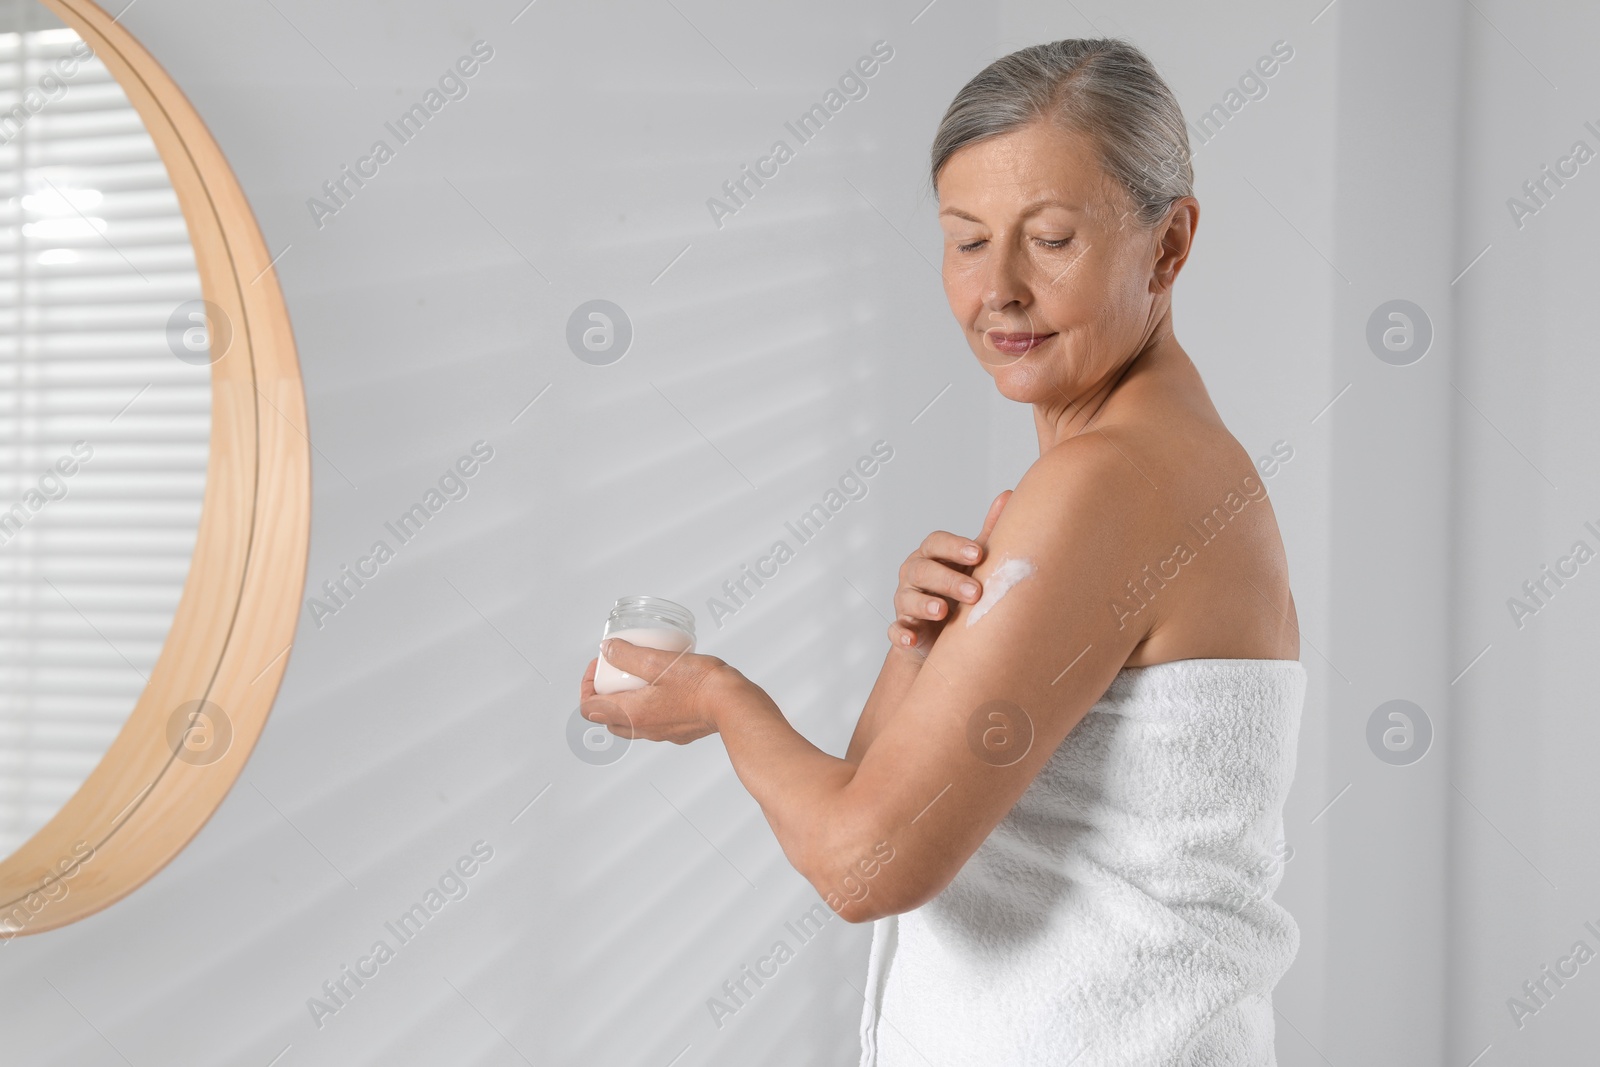 Photo of Happy woman applying body cream onto arm indoors. Space for text